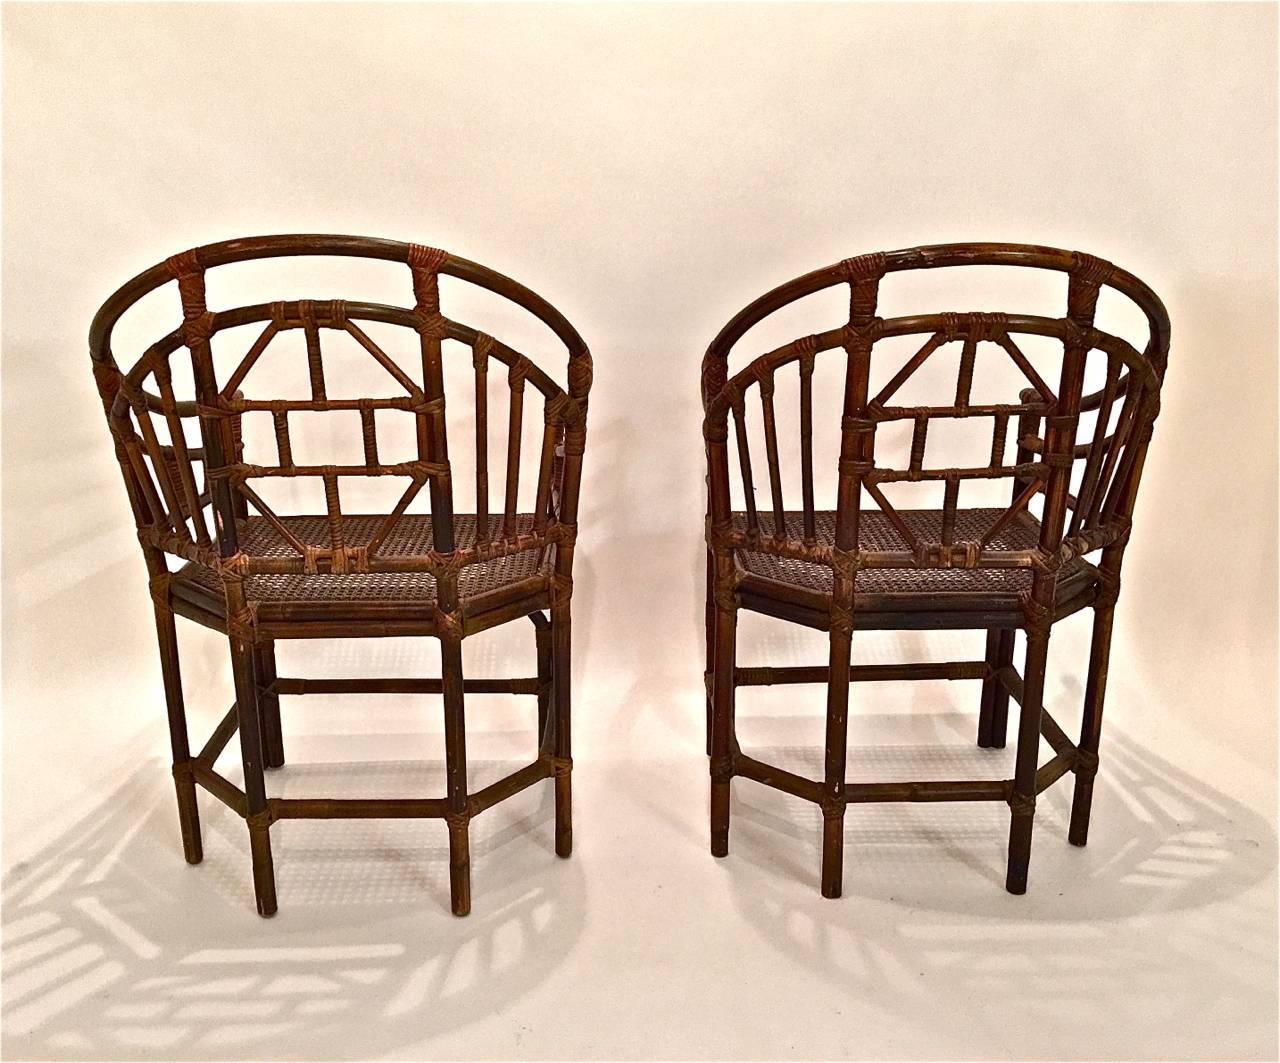 This is a great iconic set of ten Brighton Pavilion style dining chairs. The chairs date to the 1960s-1970s and are all in very good patinated condition. Four of the chairs have a slightly darker stain and one chair has had the caning on the seat